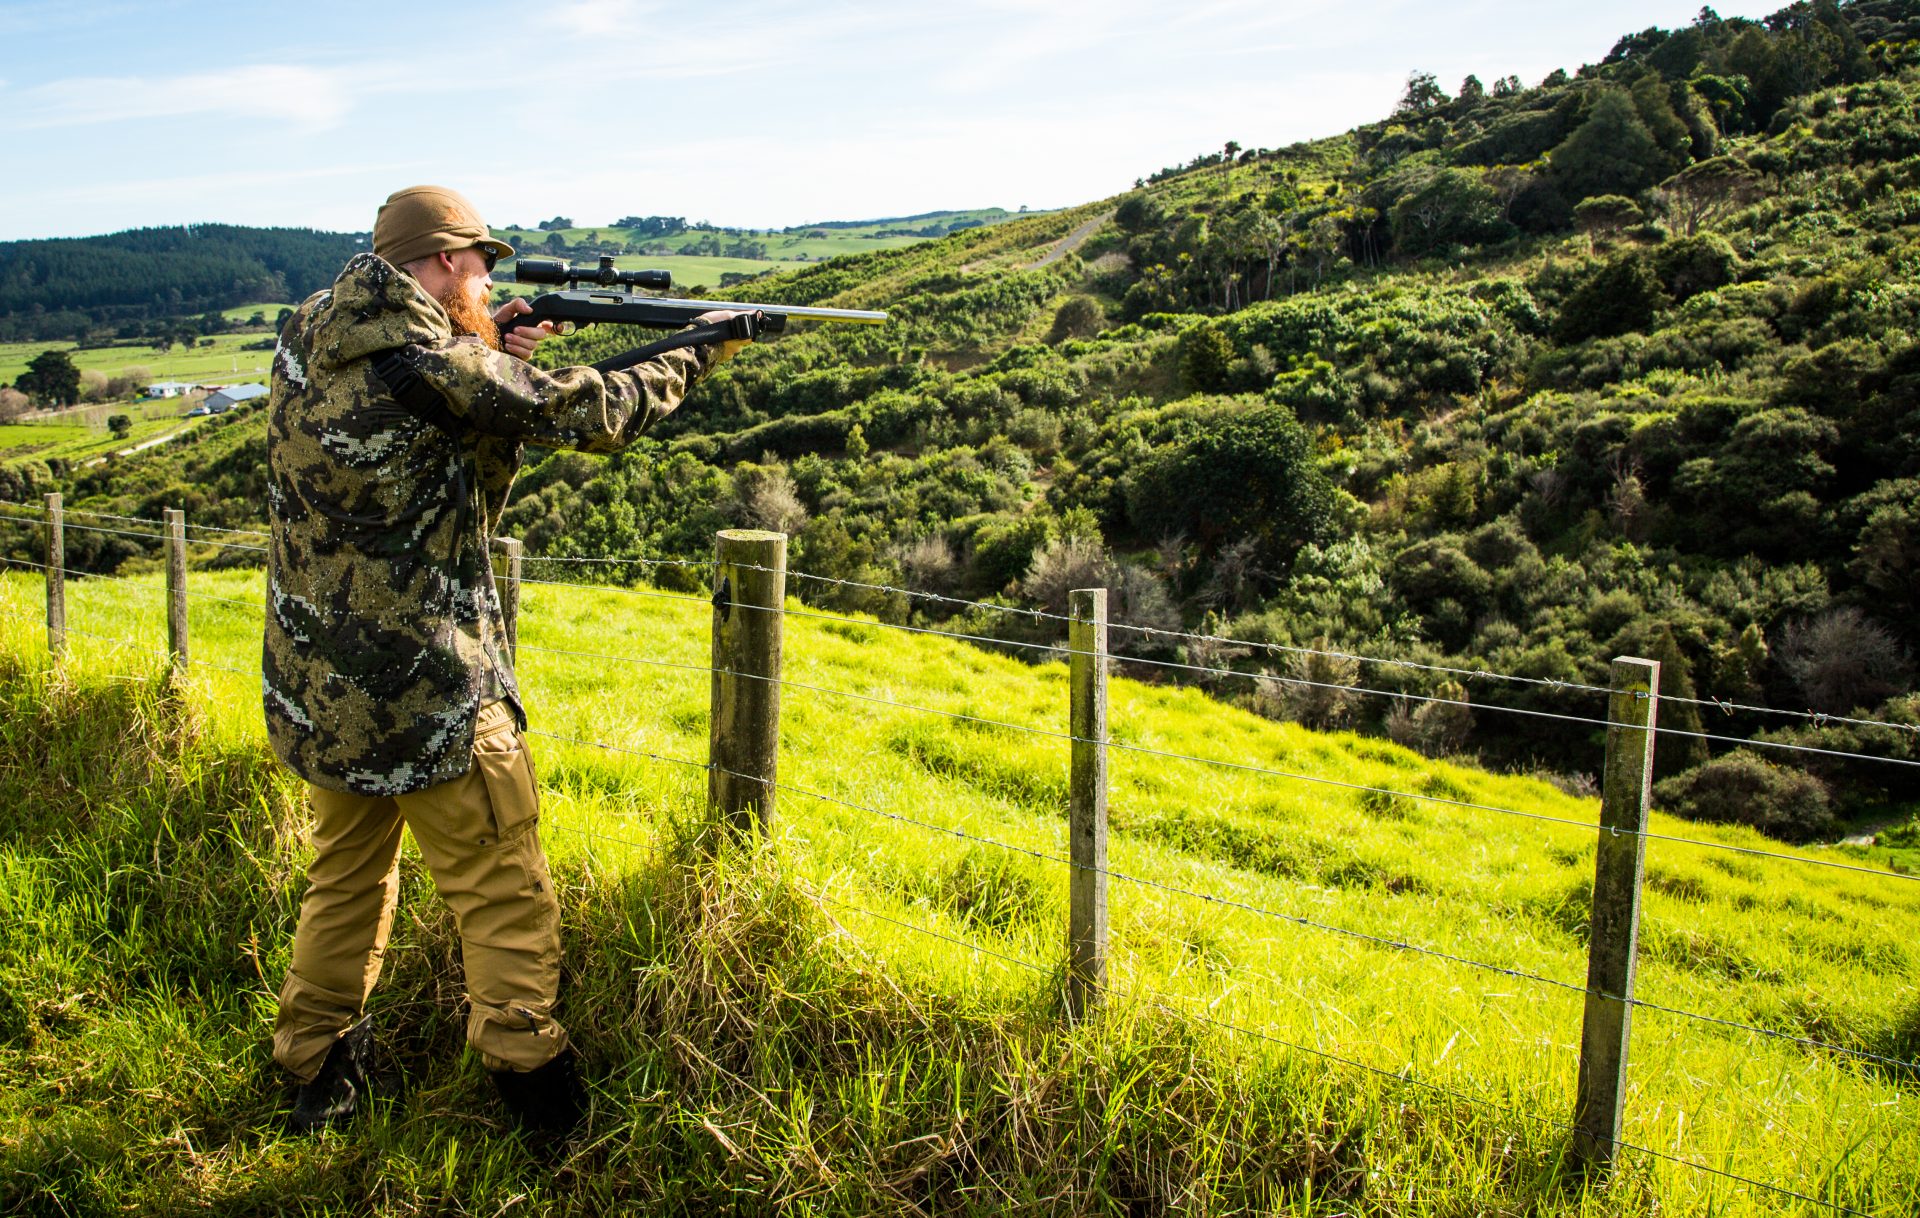 New Zealand Firearms Licence, The 2022 guide to getting your NZ Firearms Licence.